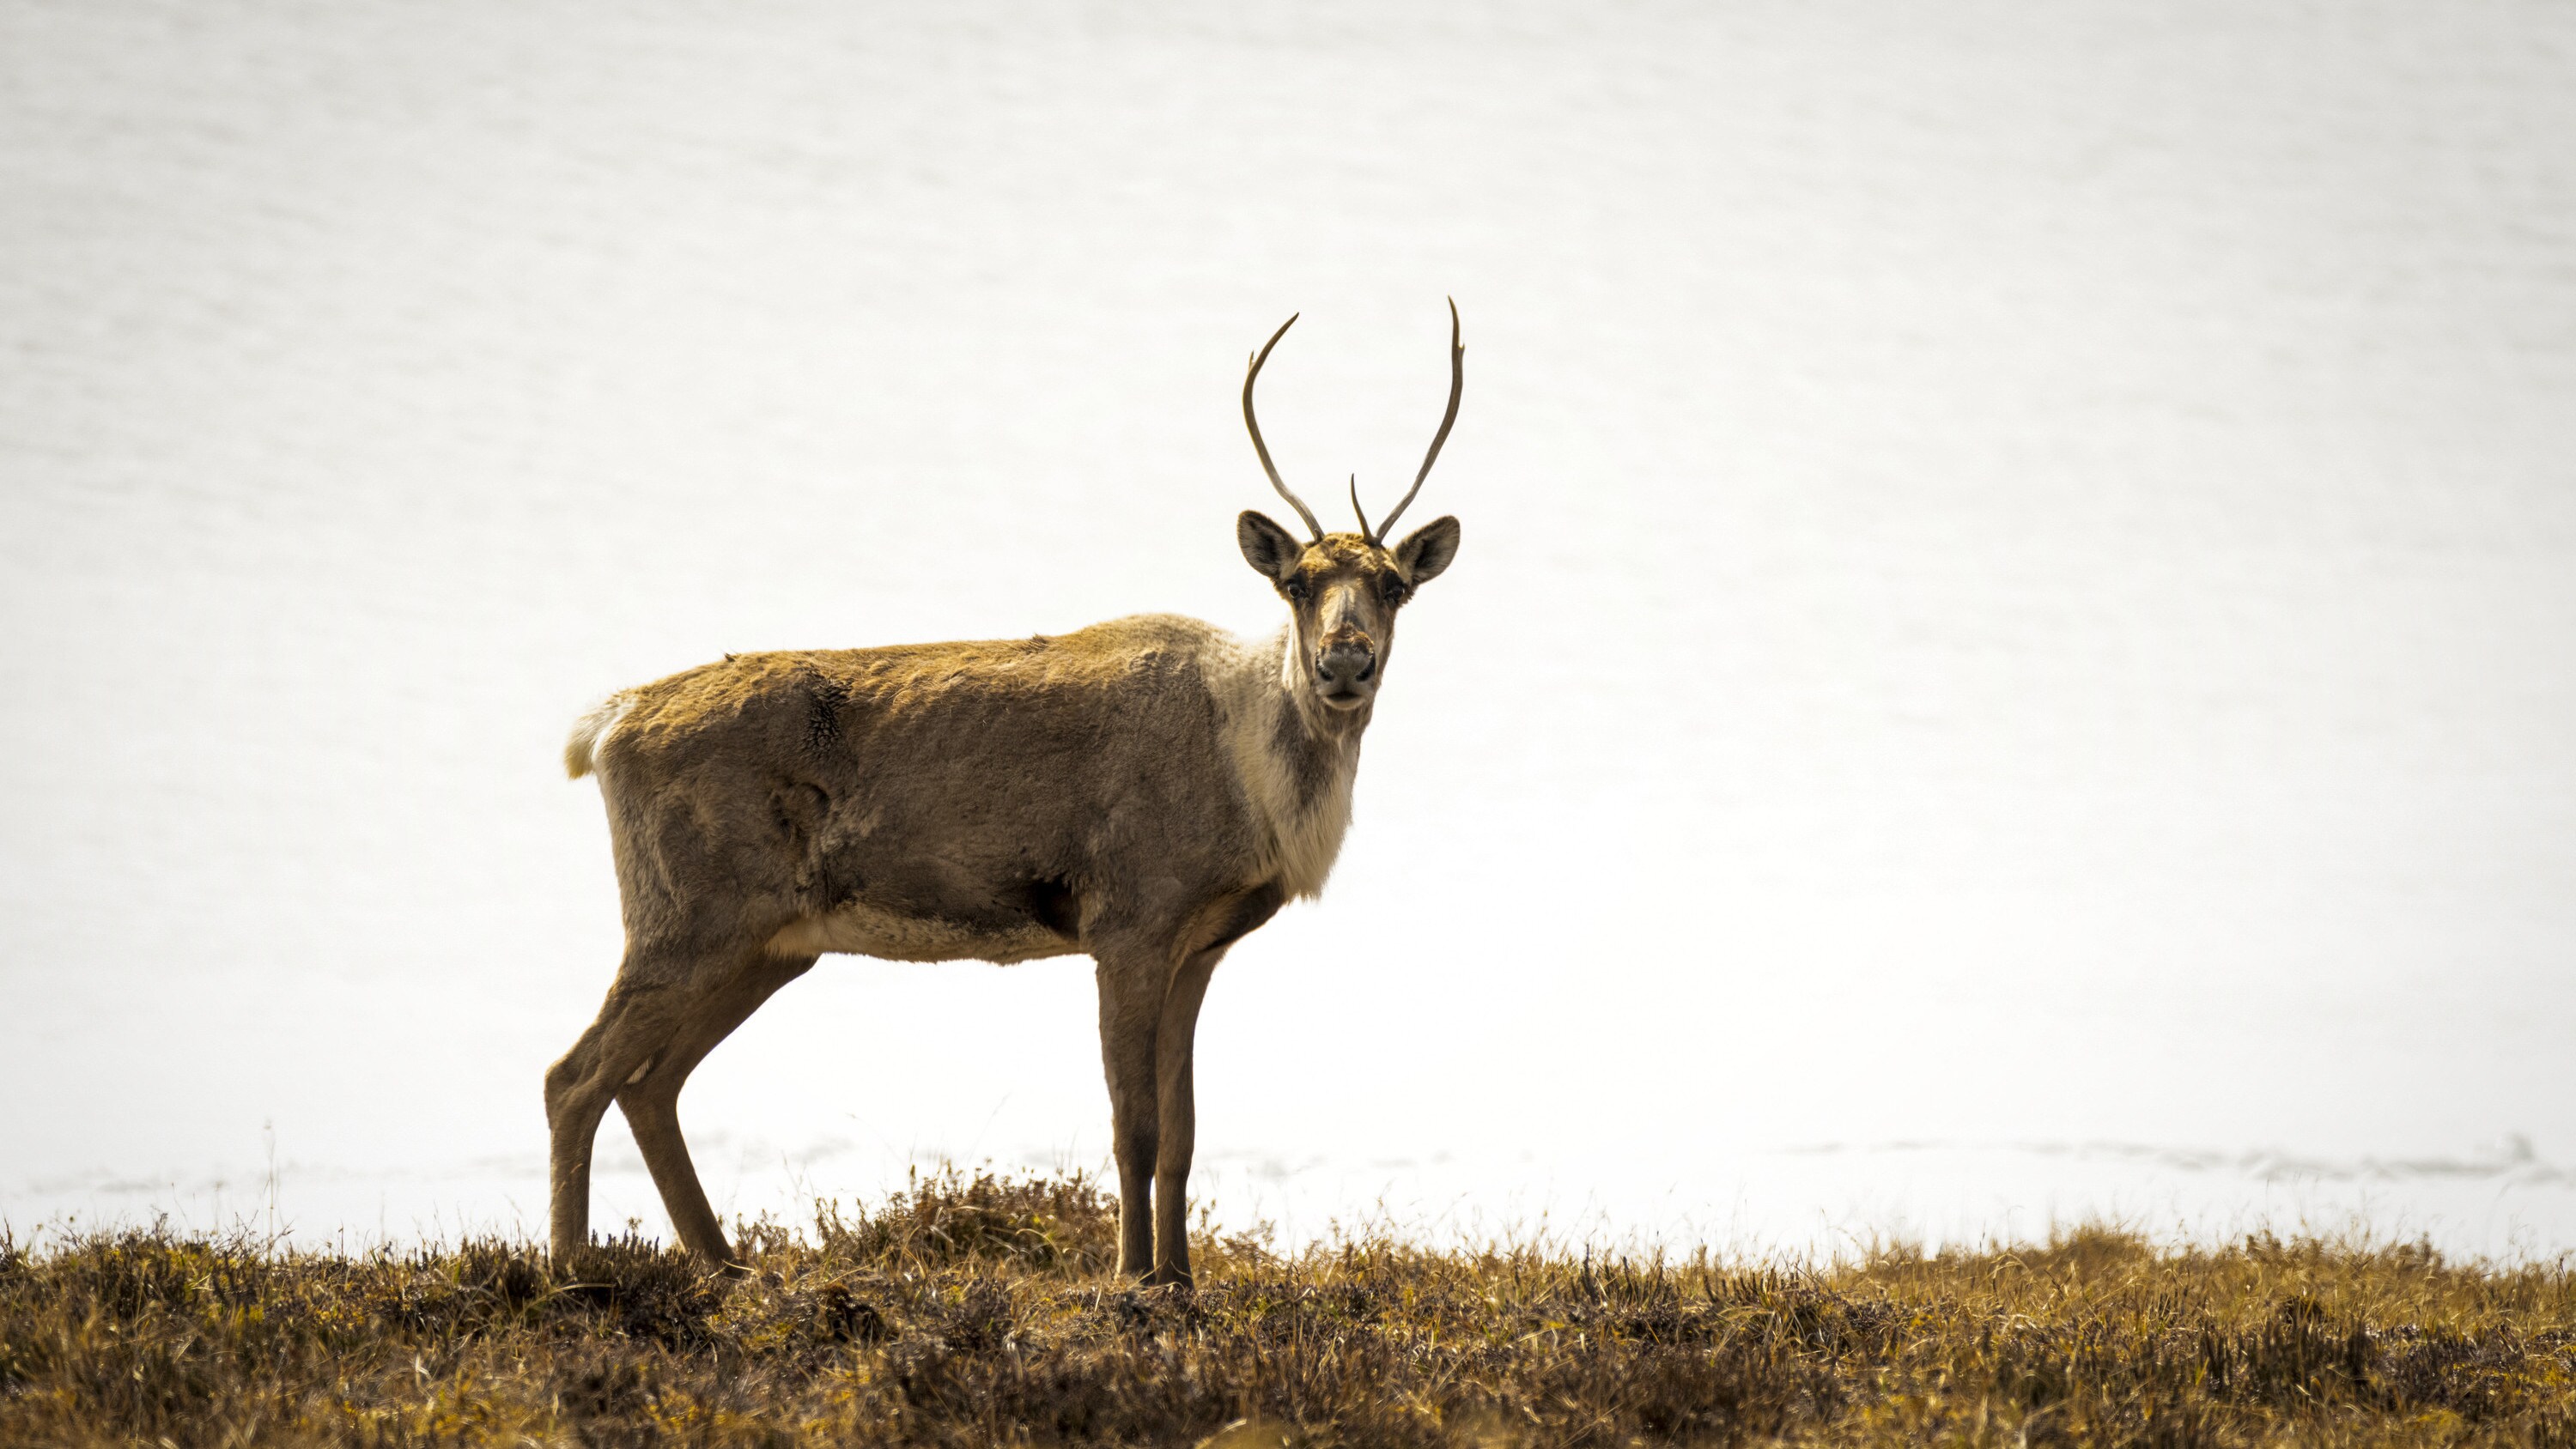 One of Alaska's native species, a caribou stands watch for predators. (National Geographic/Nick Hawkins)